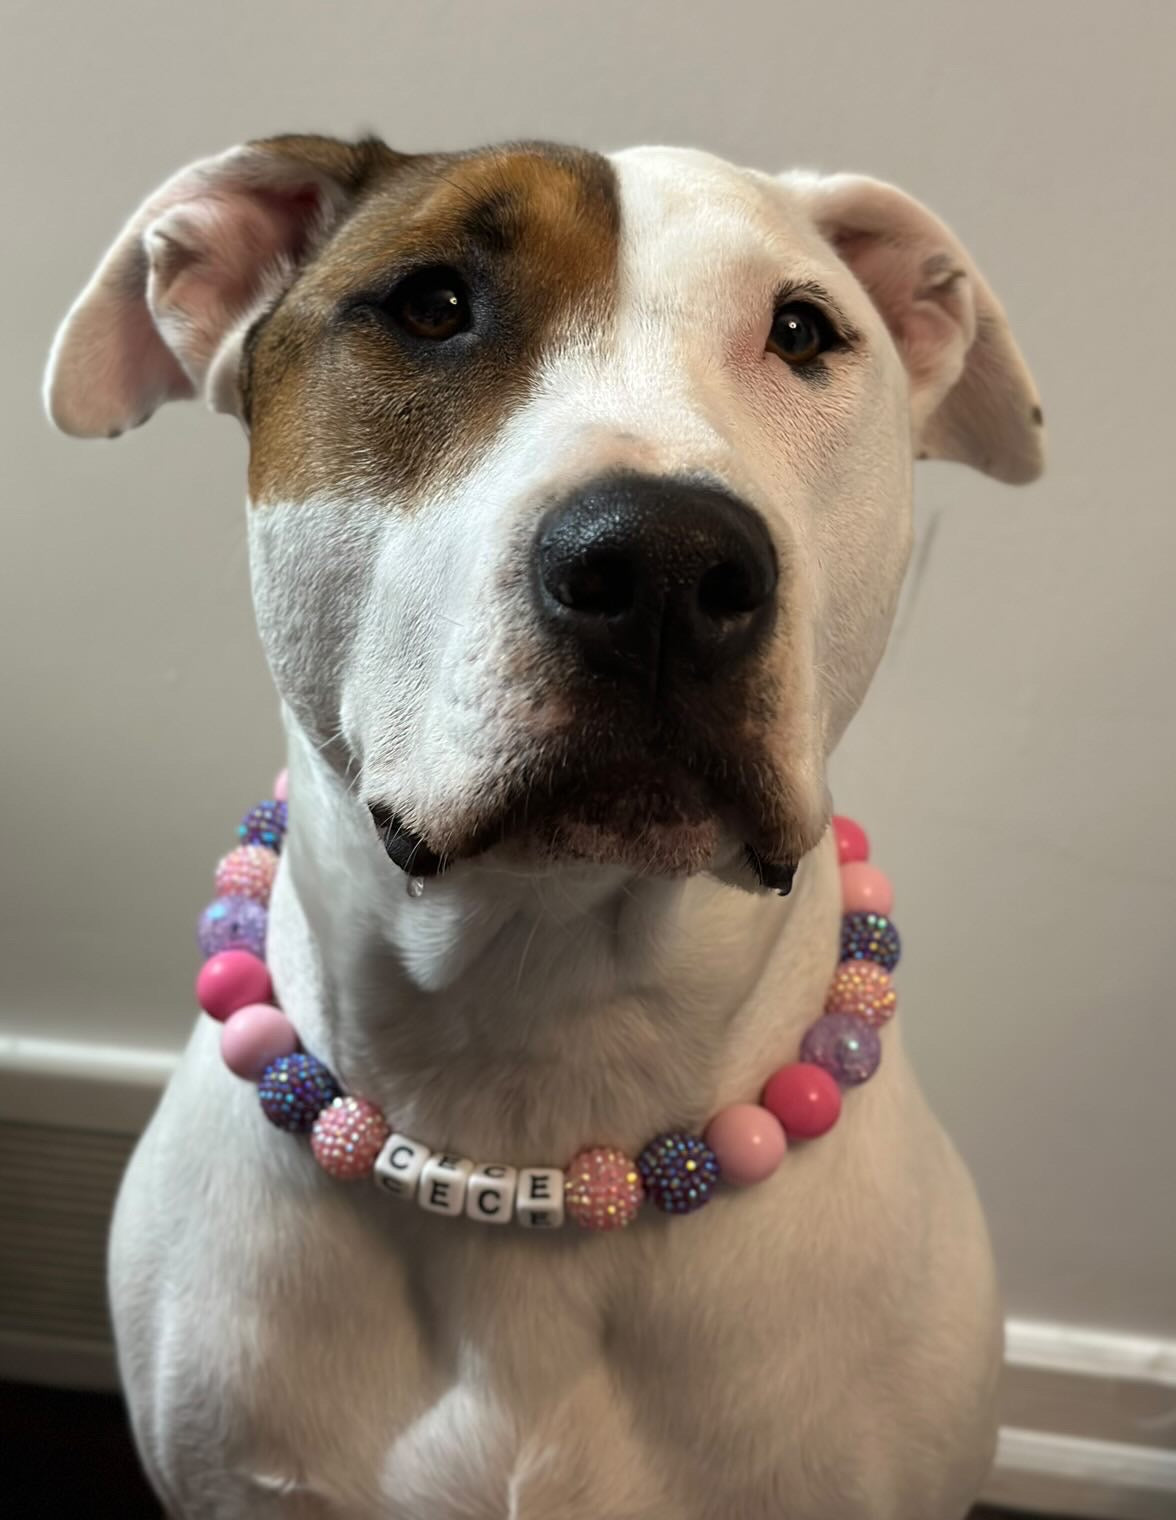 cute deaf dog modeling sugar plum glitter bead collar personalized with her name, CeCe